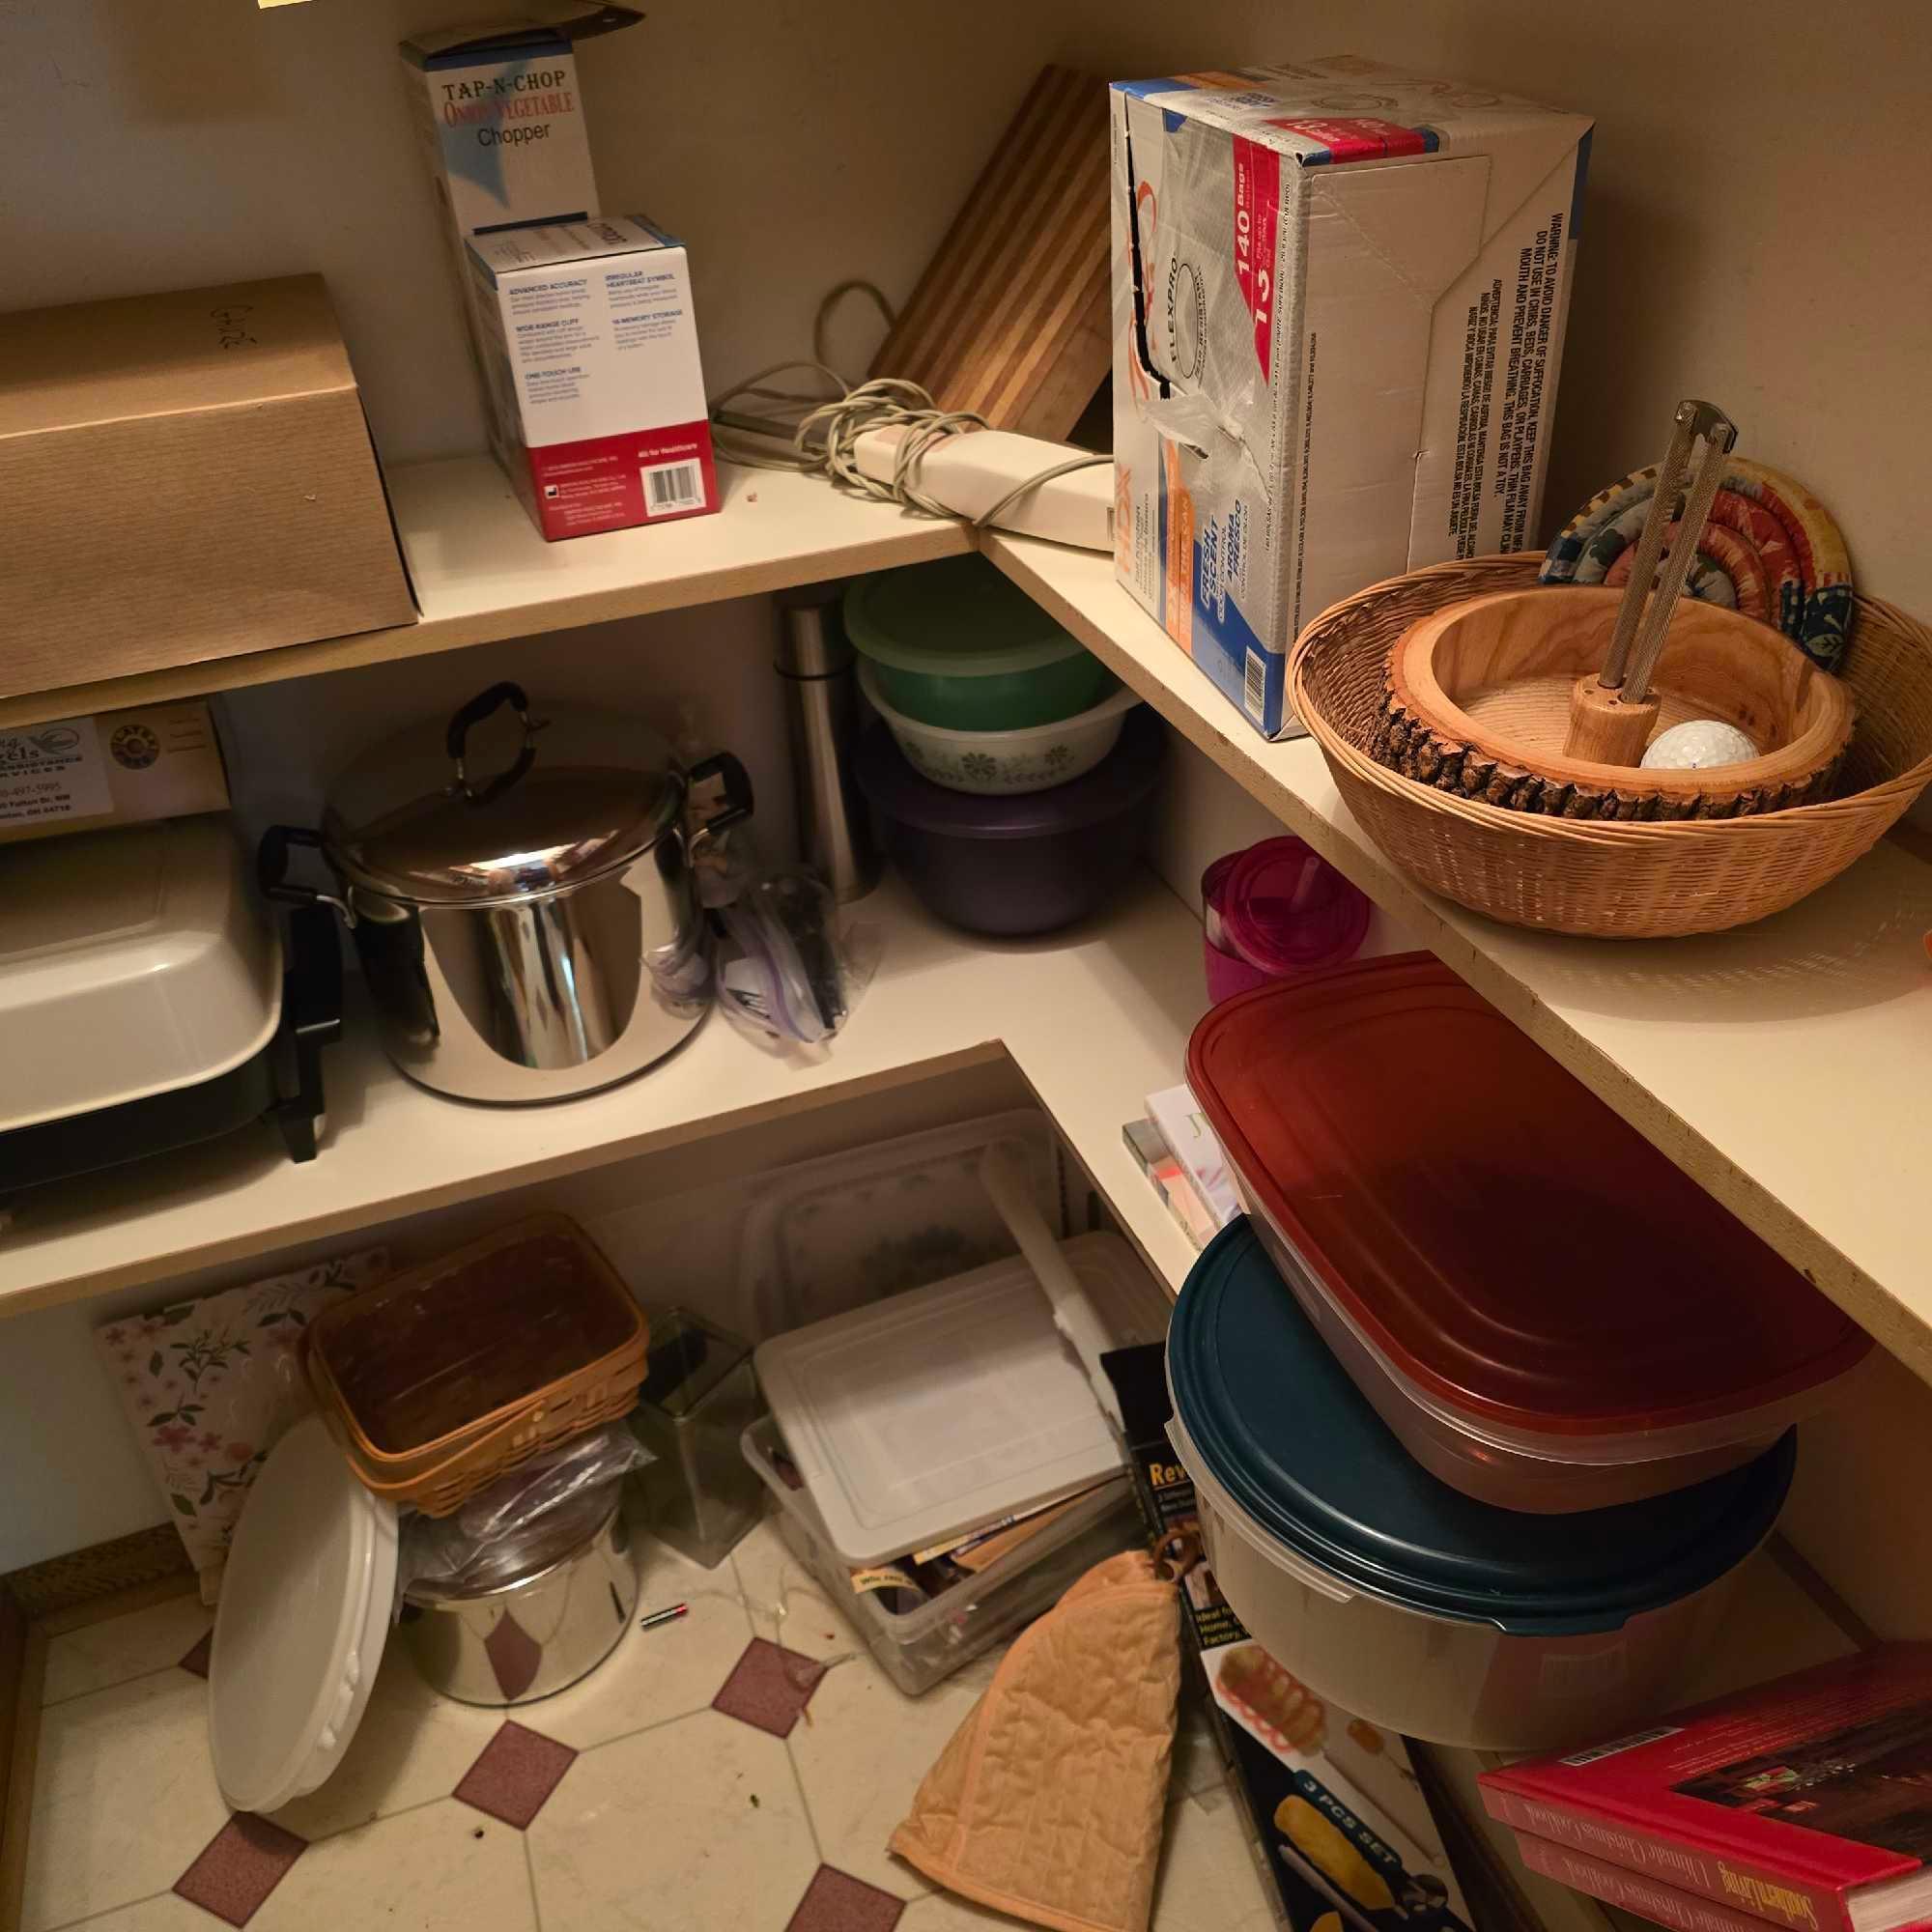 Contents Of Pantry, Kitchen Equipment